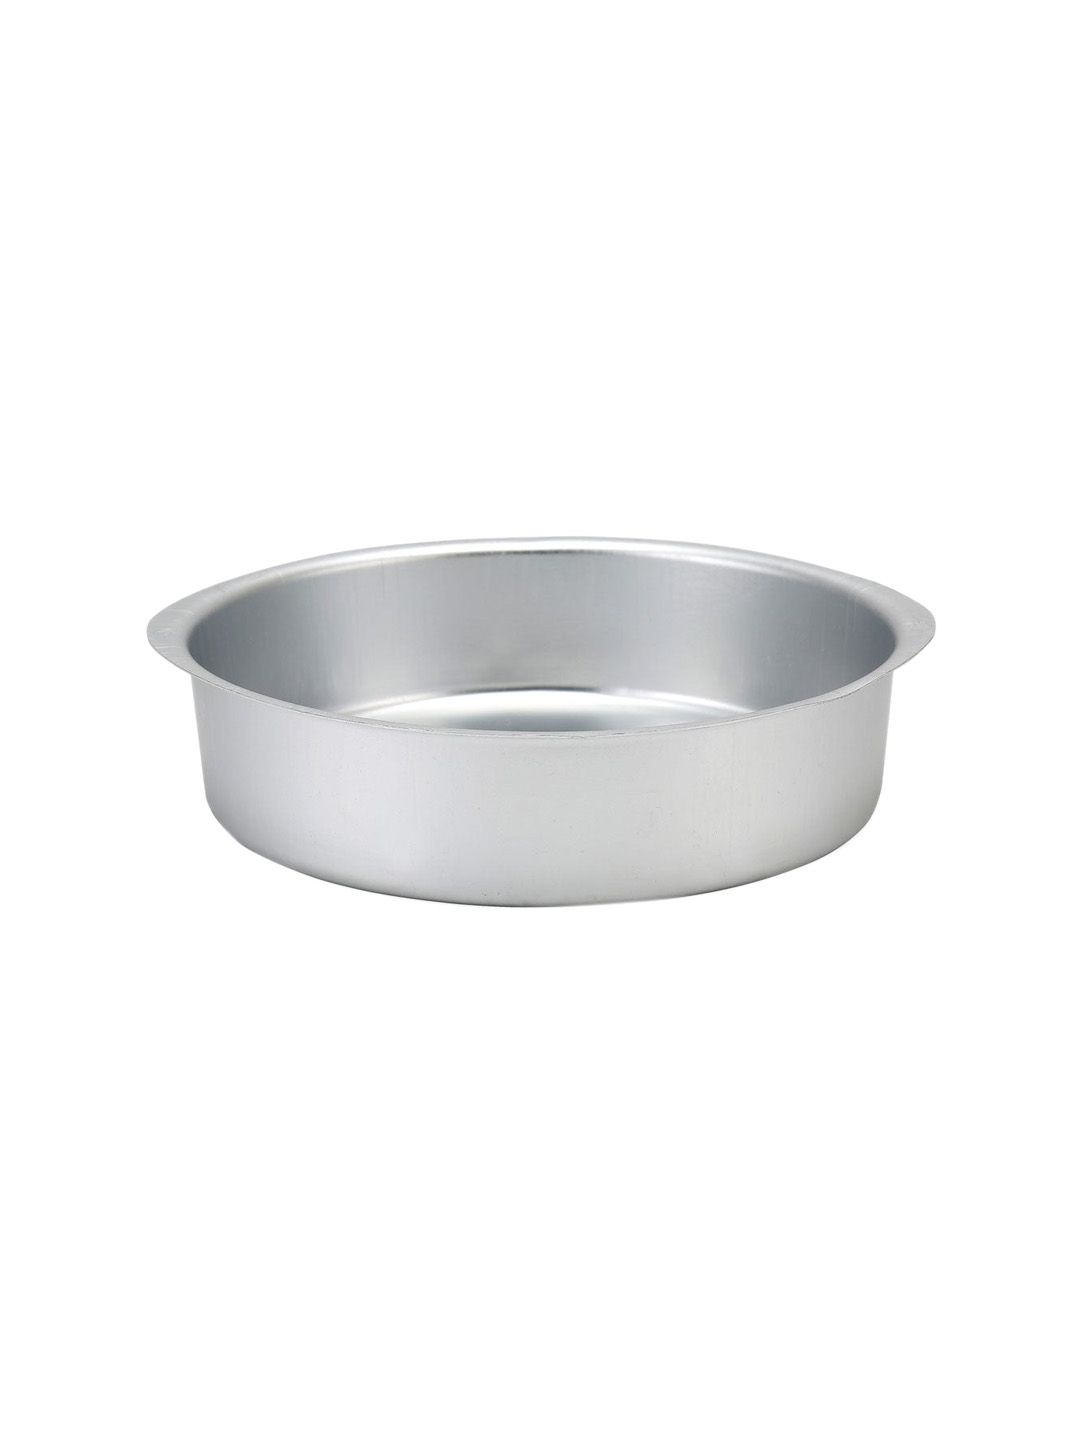 Athome by Nilkamal Grey Solid Round Large Cake Mould Price in India